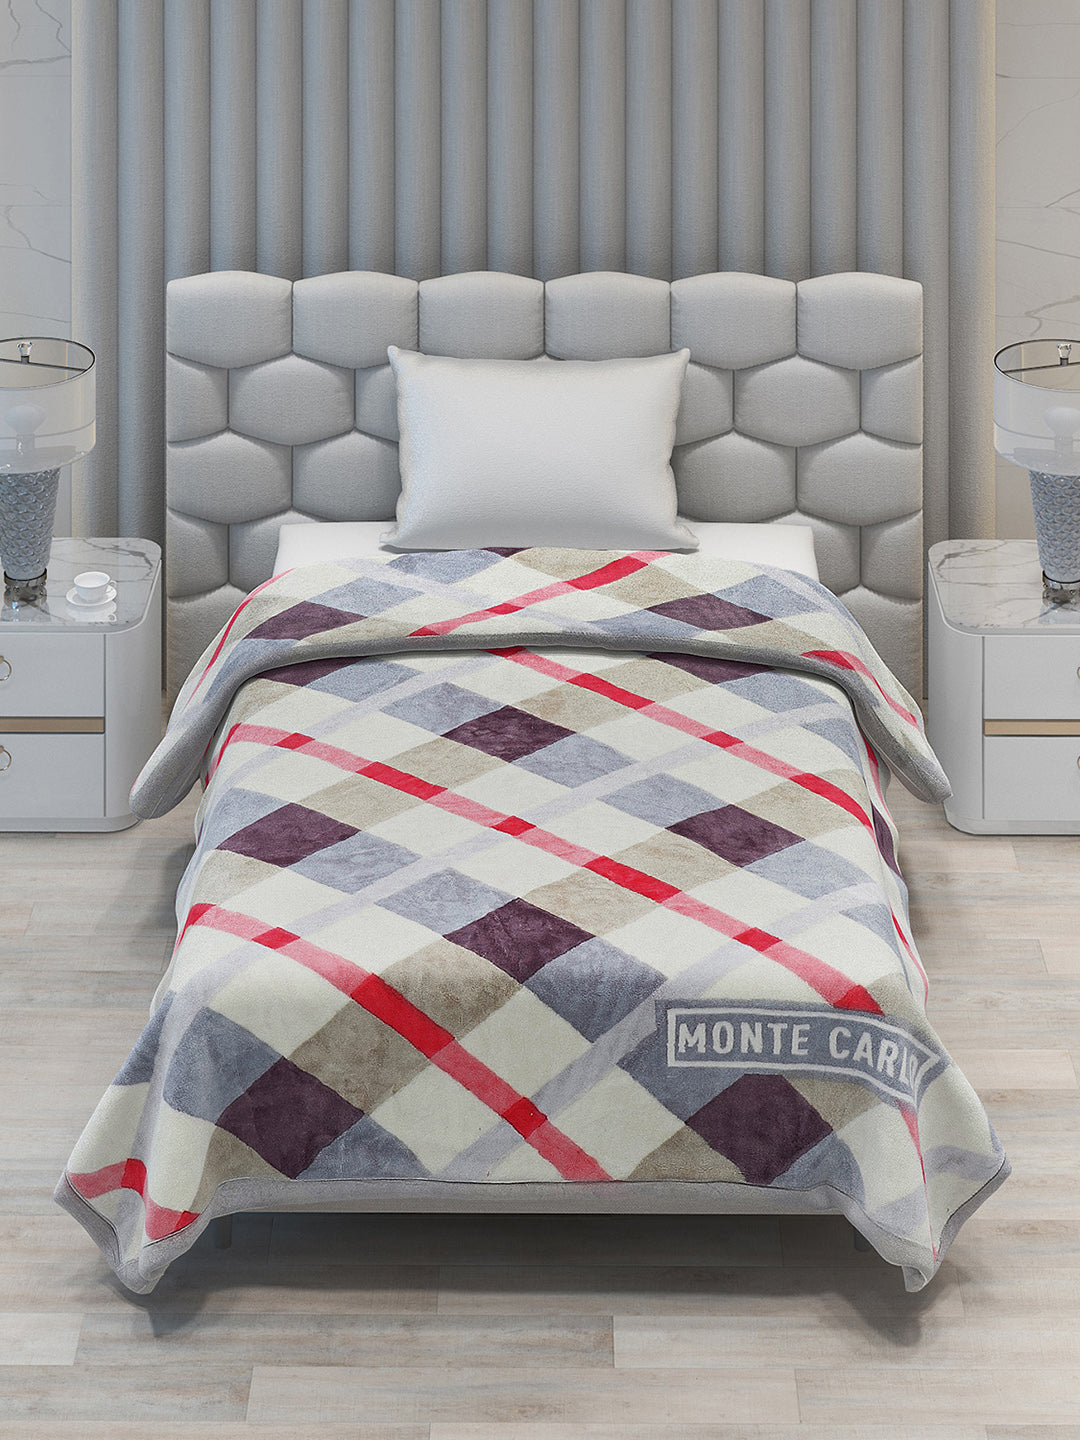 Checkered Single Bed Blanket for Mild Winter -2 Ply